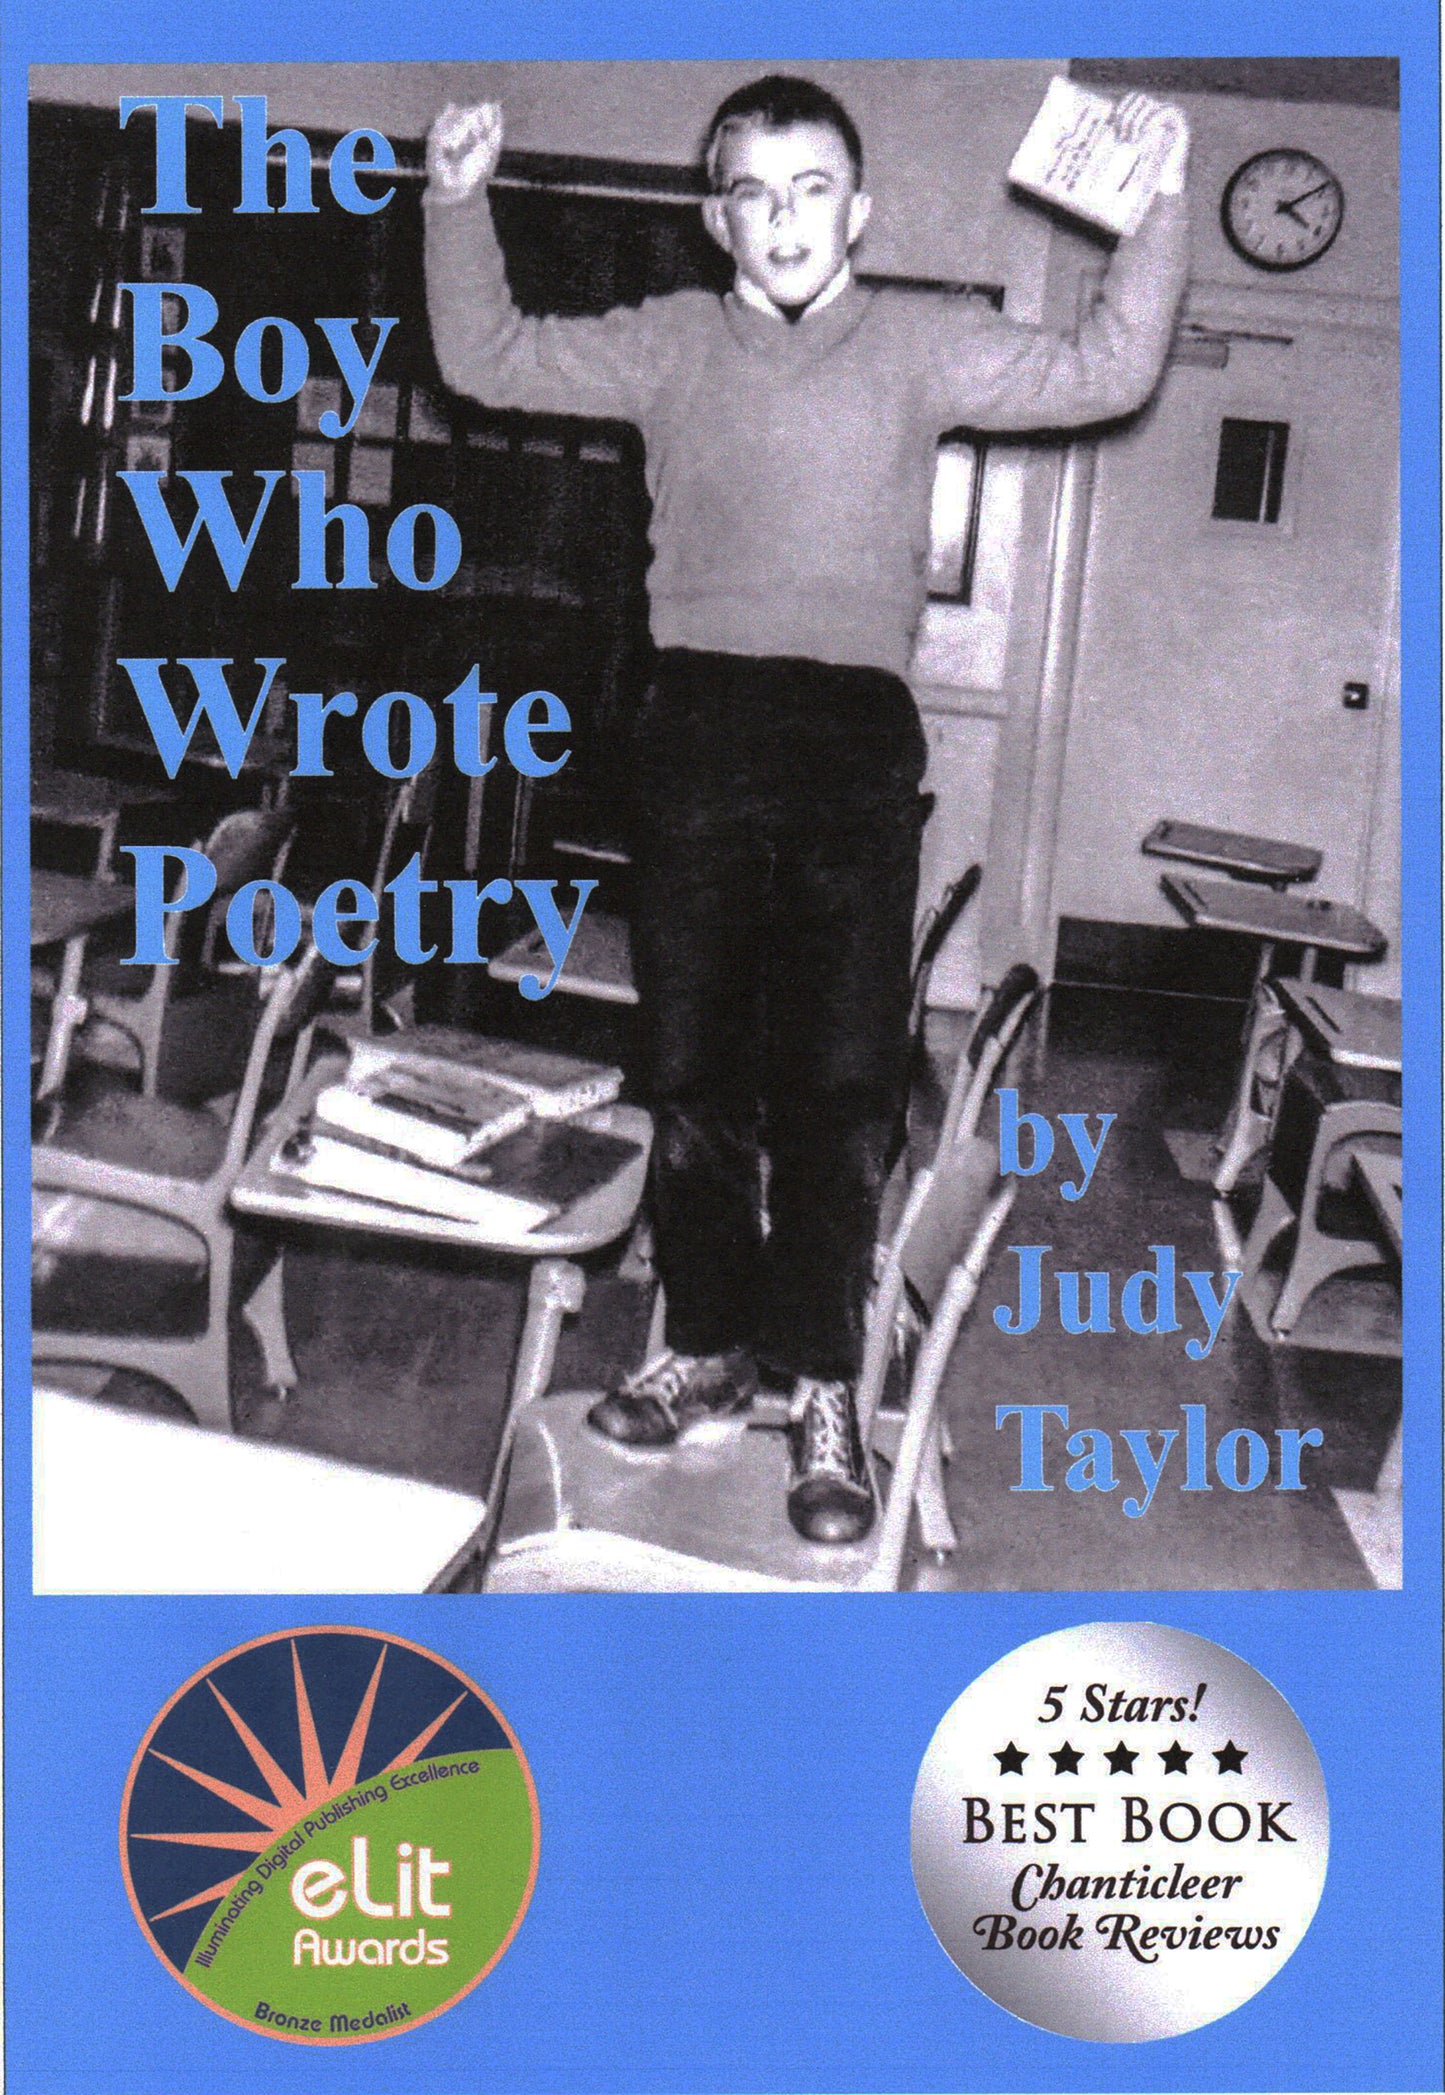 Book 7: The Boy Who Wrote Poetry eBook, SALE 20% off!